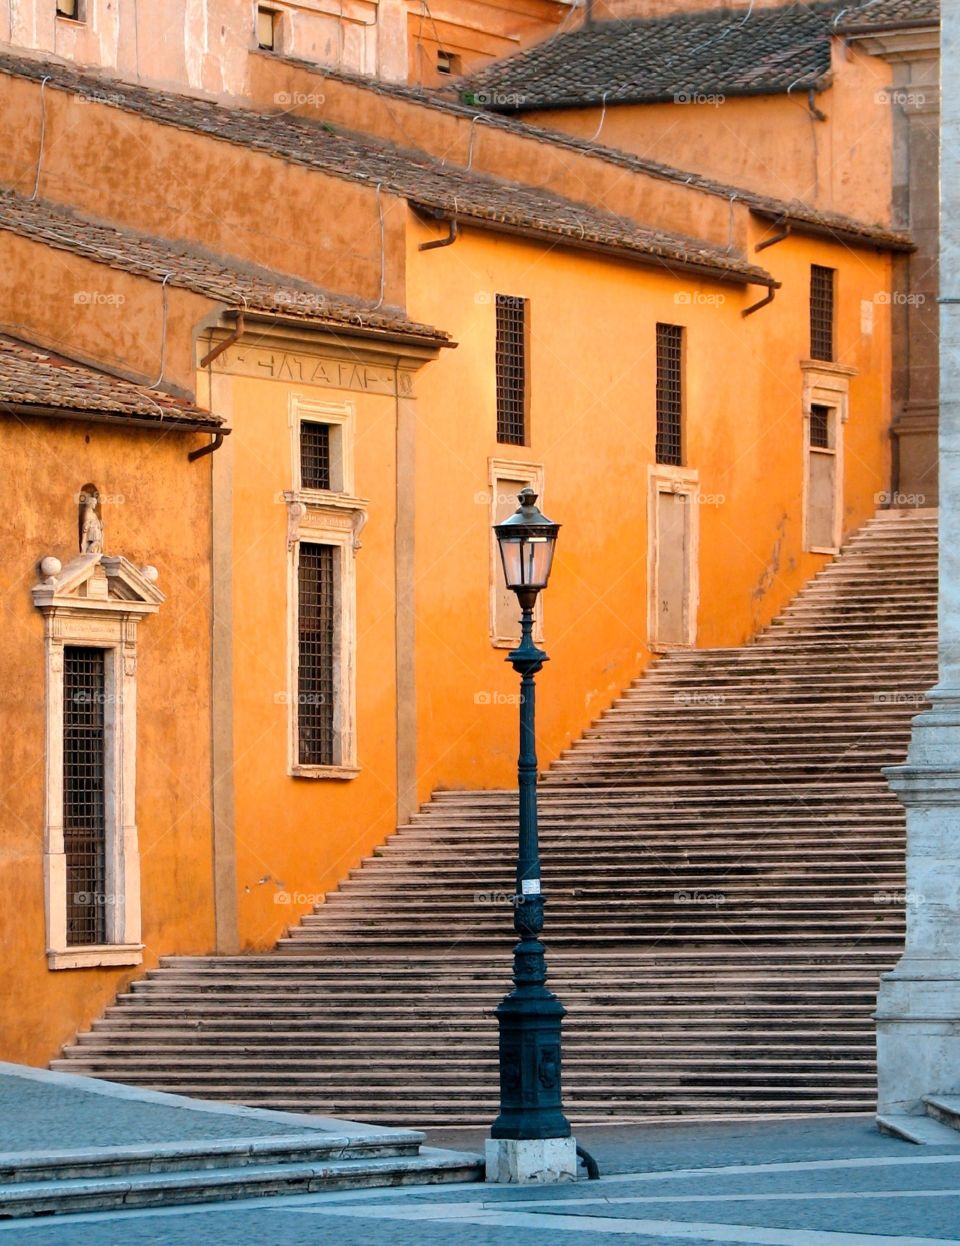 Staircase in Rome. Staircase in Rome near the Capitoline Museums